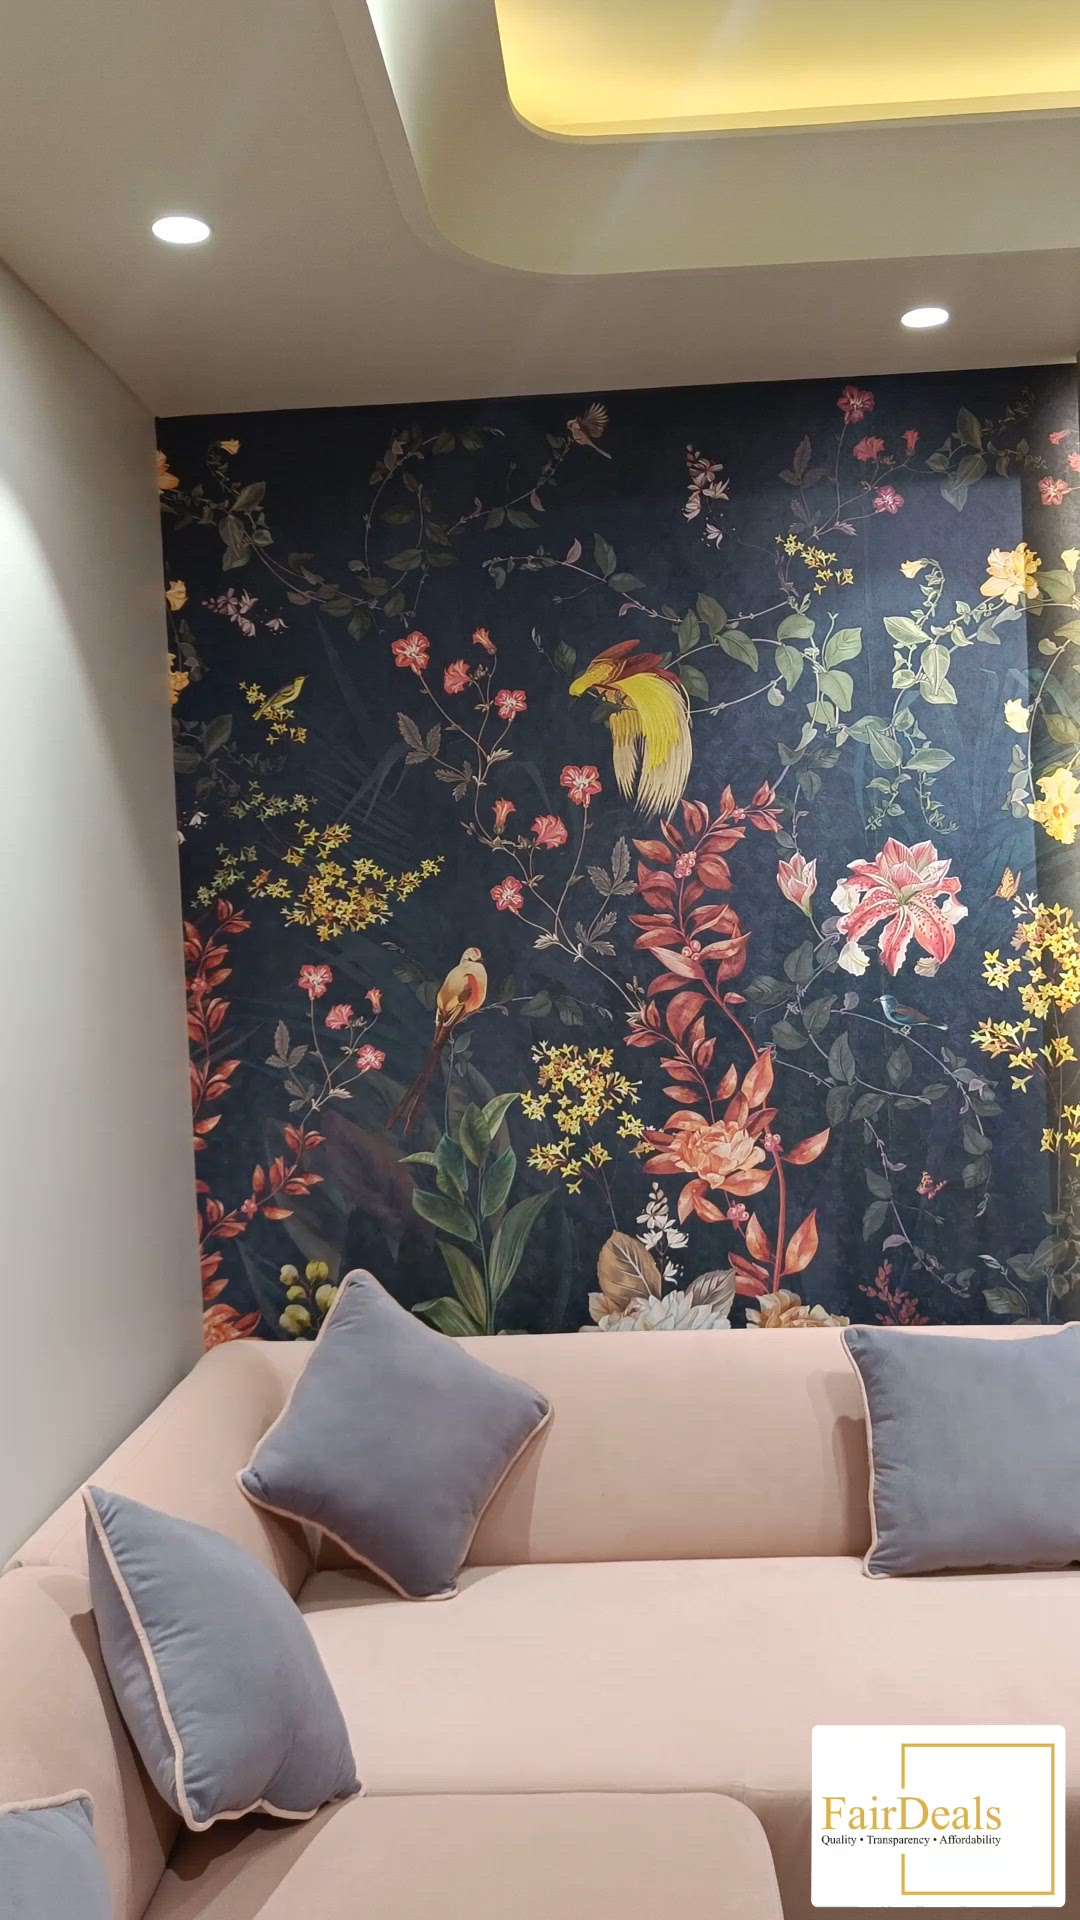 Customised Wallpaper Installed By FairDeals

Make Your Home Beautiful With Our Wide Range Of Interior Products.
#fairdealsjaipur #fairdeals #customized_wallpaper #wallpaper #LivingRoomWallPaper #livingarea #livingareadesign #livingareadecor #wallpapersrolls #wallpaperwholesaler #wallpaperforlivingroom #HomeDecor #WallDecors #walldecoration #InteriorDesigner #interiordesigners #LUXURY_INTERIOR #interior_designer_in_rajasthan #jaipurinteriordesigner #architect #architecturedesigns #Architectural&Interior #jaipurdiaries #jaipuri #jaipurcity #jaipurblogger #jaipurcityblog #mansarovar #rajaparkarchitect #rajapark #vaishali #vaishalinagar #vaishalinagararchitect #vaishalinagarjaipur #jhotwara #jhotwarajaipur #malviyanagarjaipur #malviyanagar #pinkcity #pinkcityjaipur #business #viralkolo #viralreels #reels #homesweethome #hometour #trendingdesign #floralwallpapers #apartmentinterior #villaconstrction #banglow #MasterBedroom #drawingroom